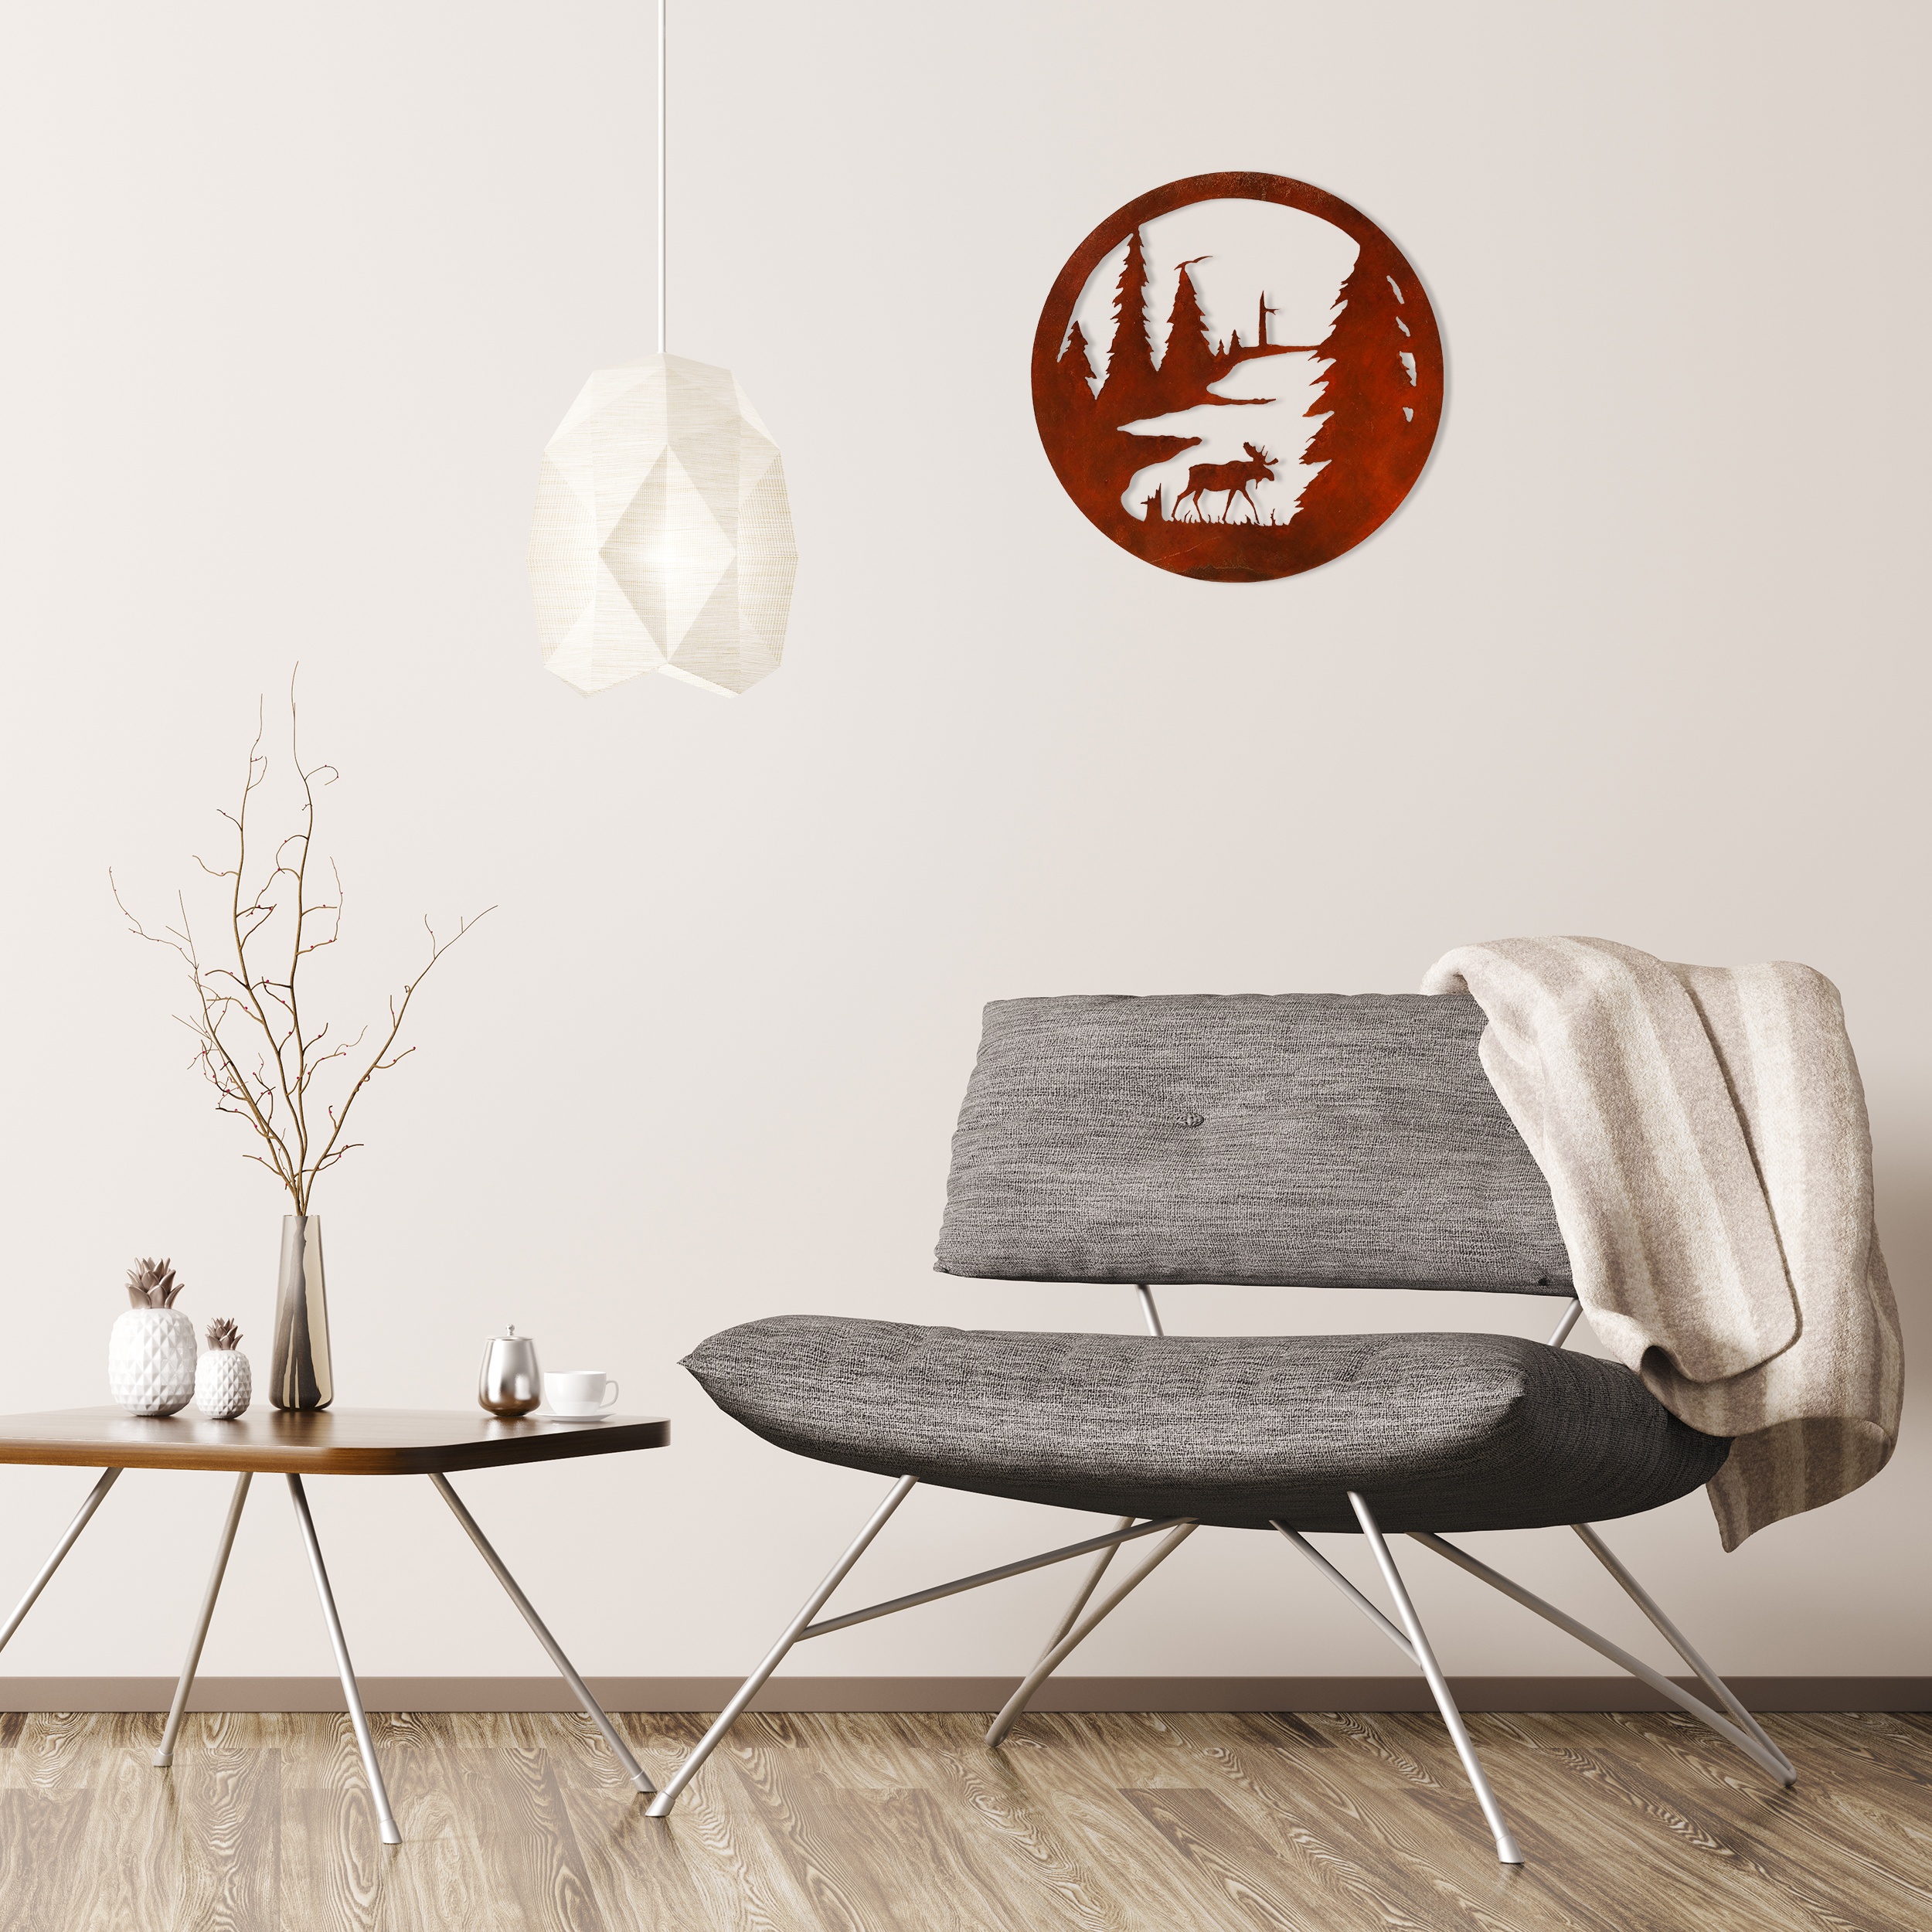 rust-moose-circle-over-gray-chair